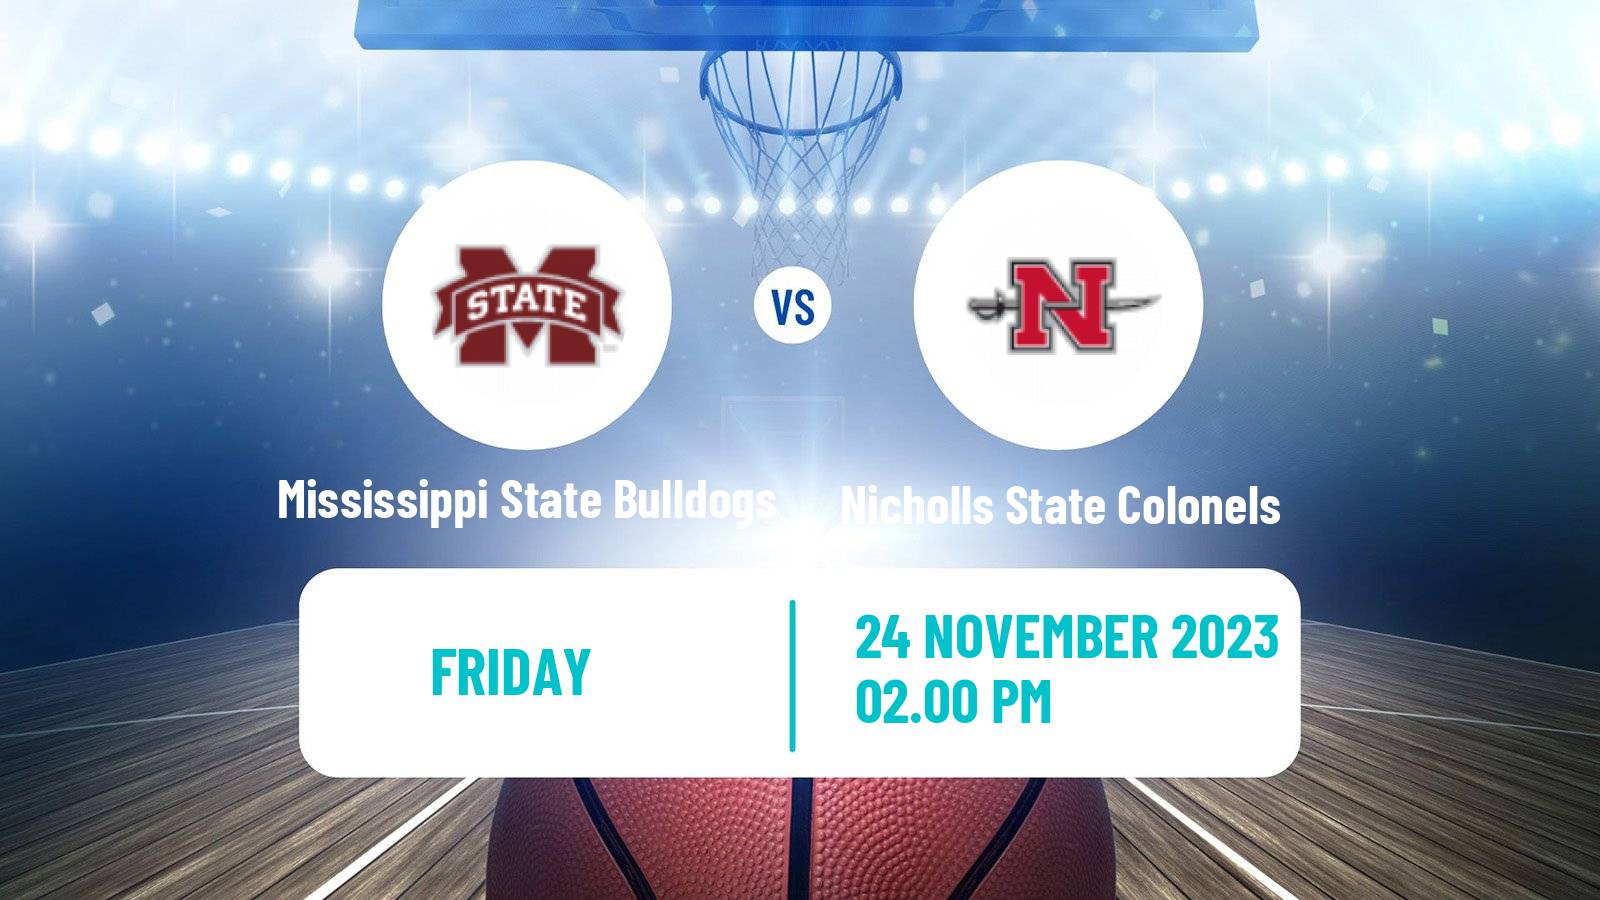 Basketball NCAA College Basketball Mississippi State Bulldogs - Nicholls State Colonels